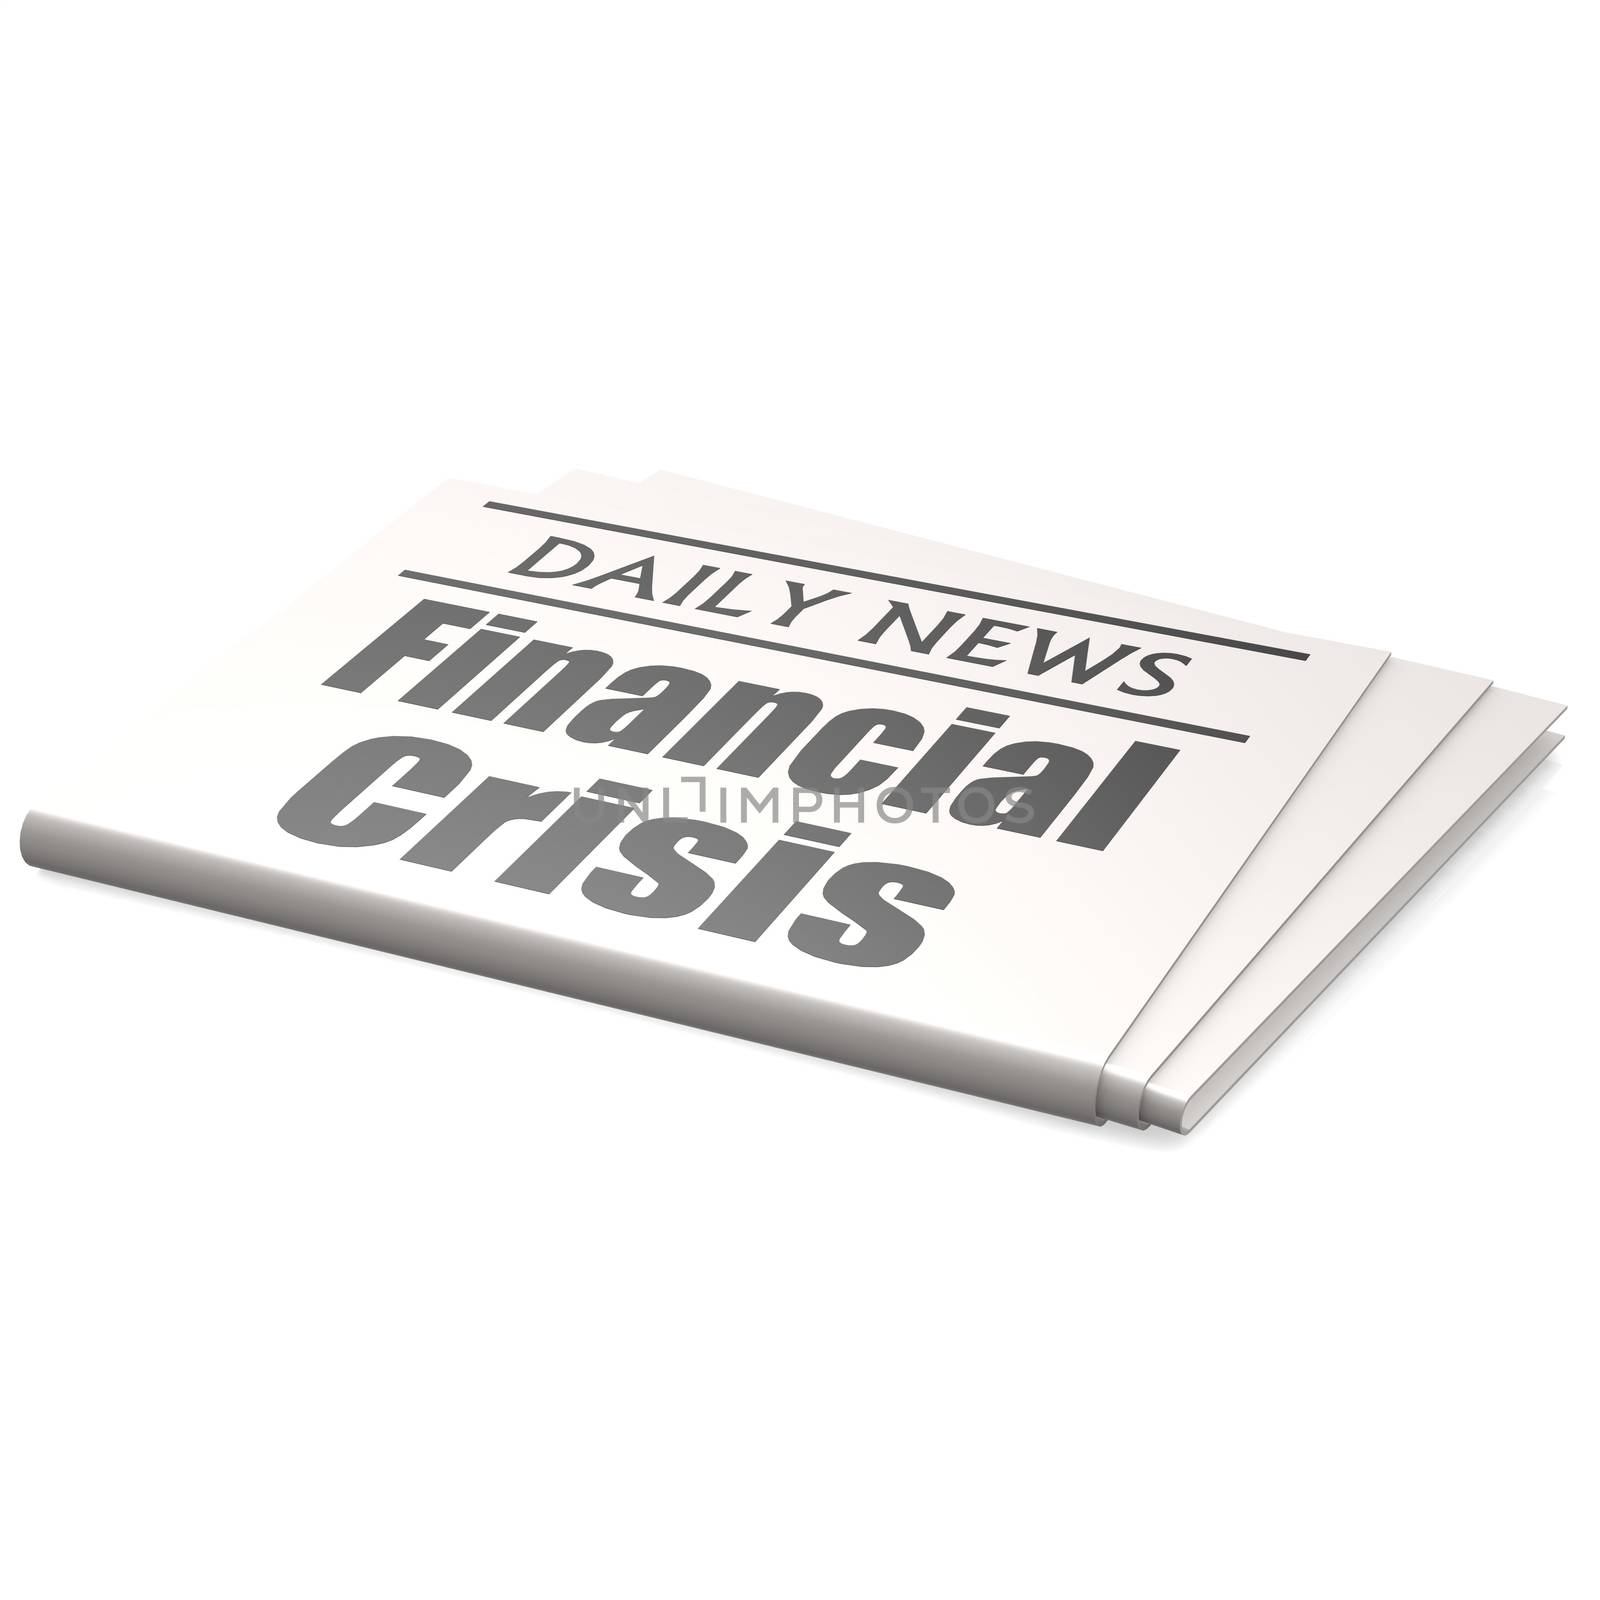 Newspaper financial crisis by tang90246